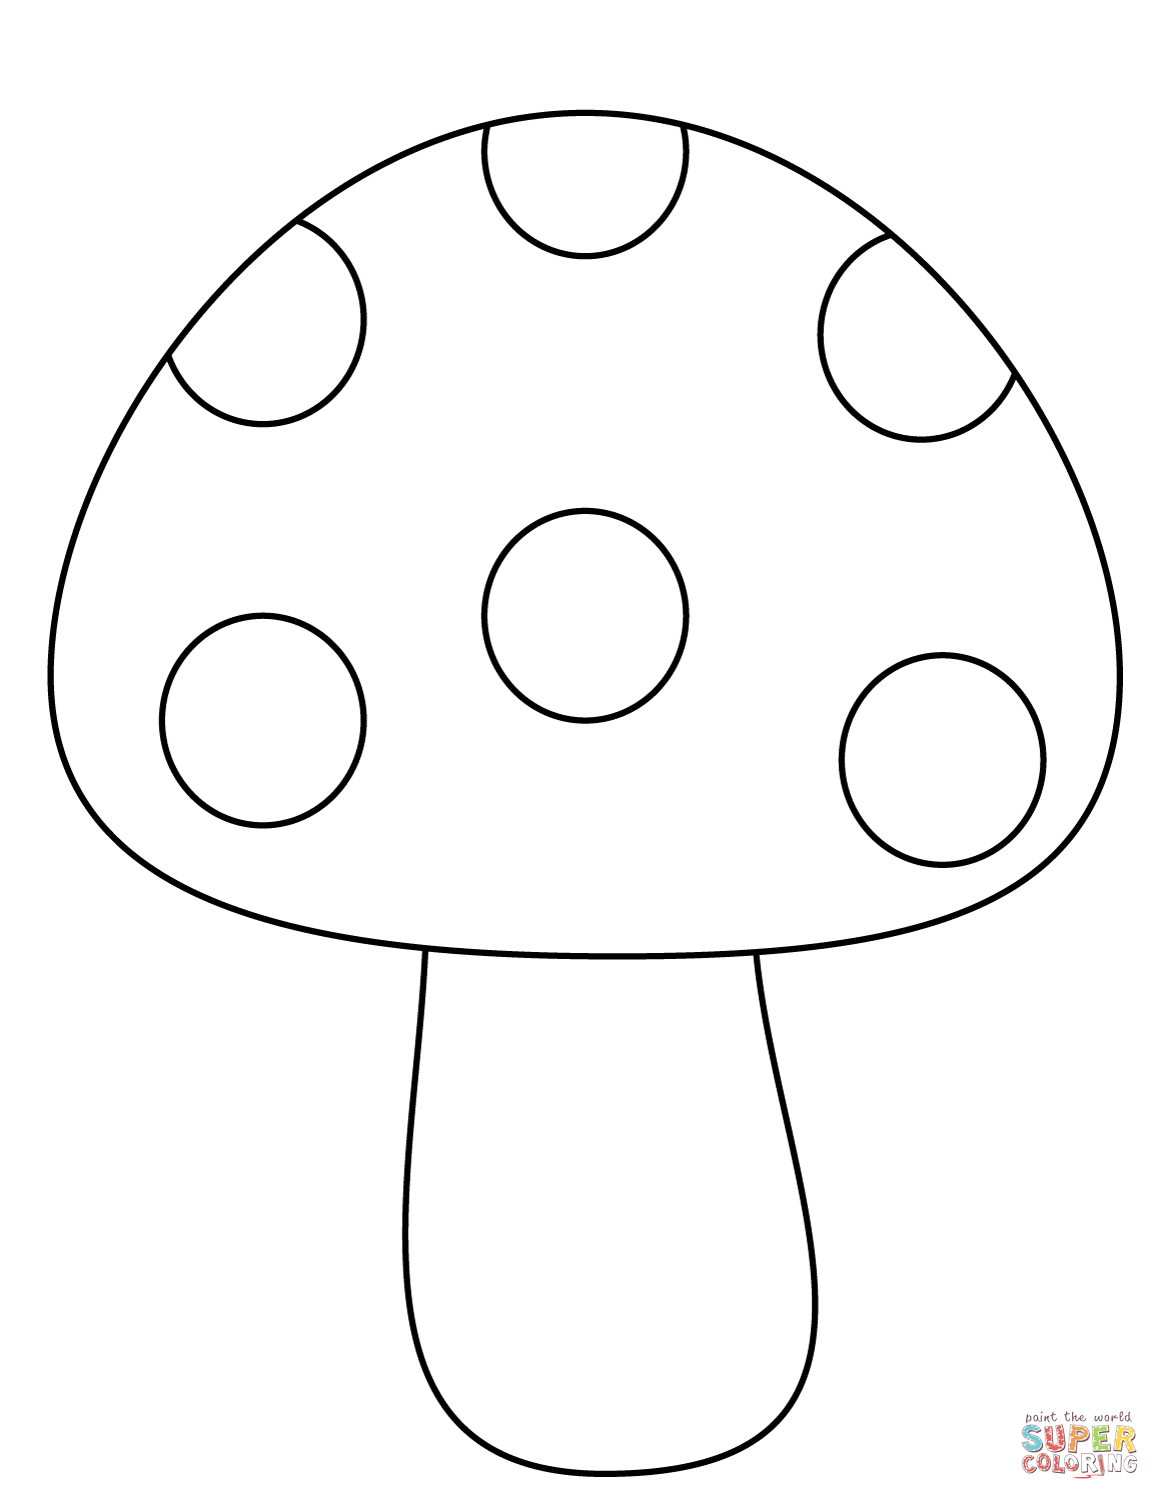 Coloring Pages Mushroom Coloring Pages For Adult Sexiz Pix